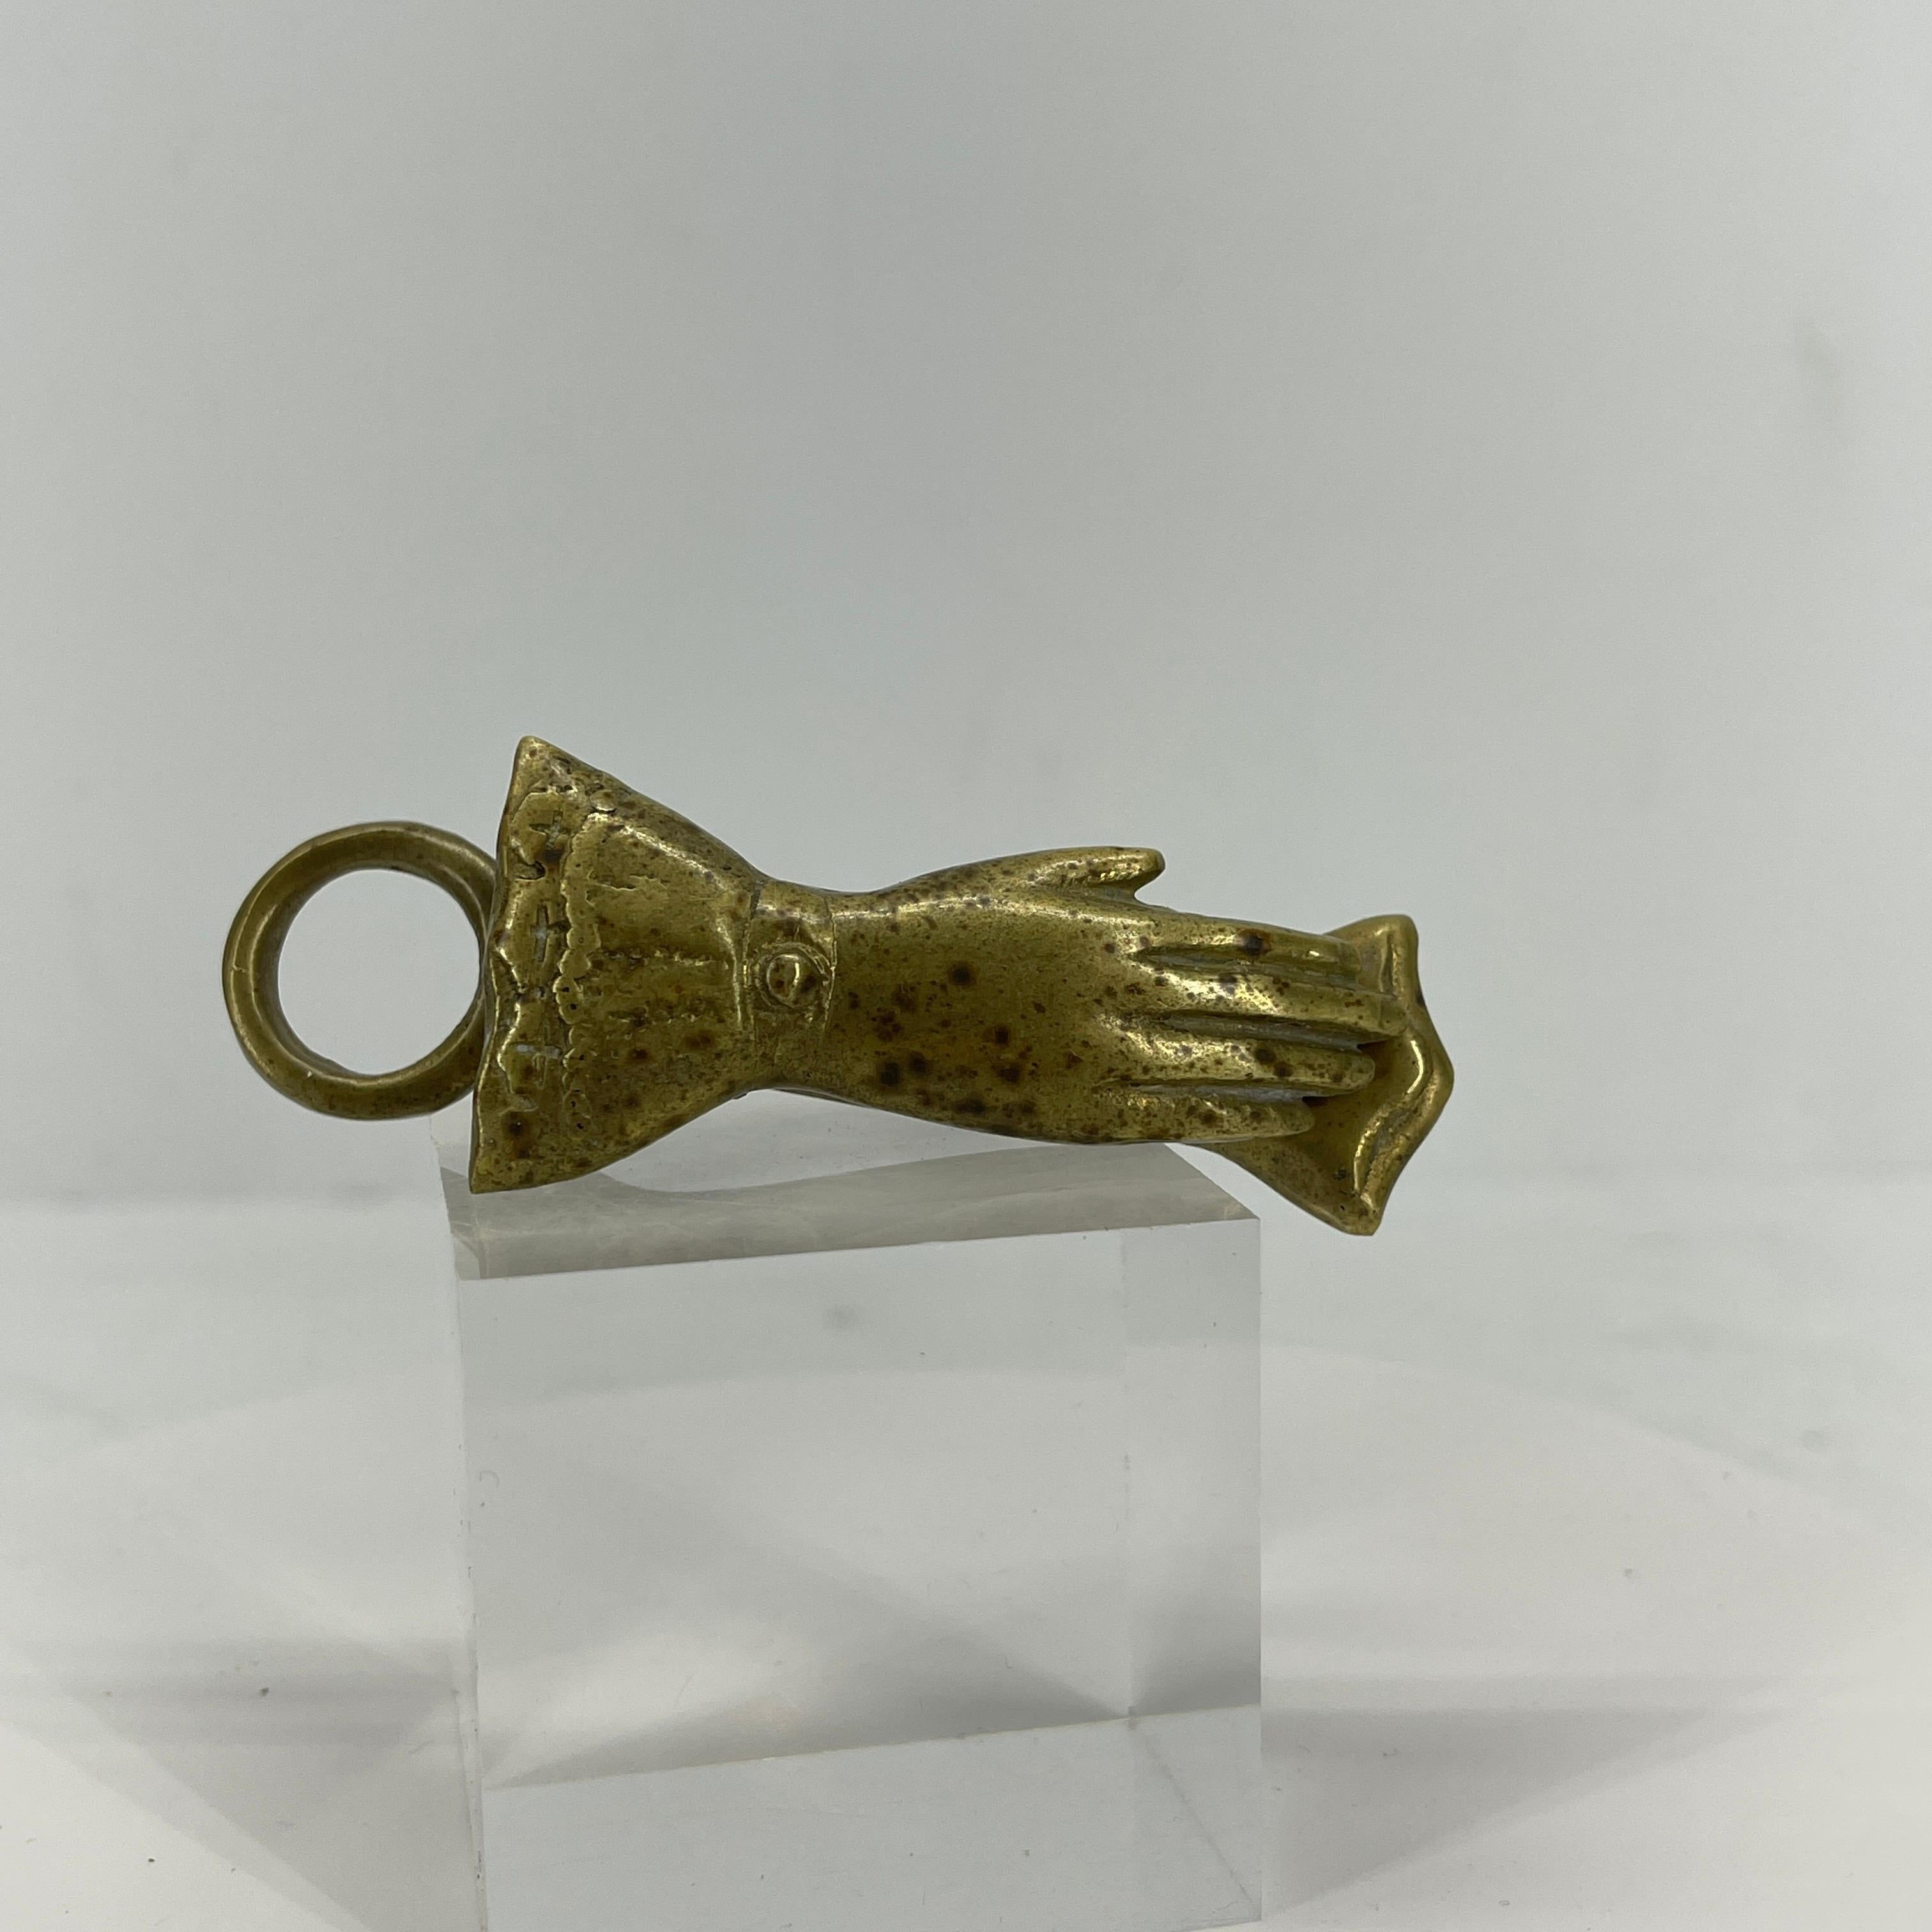 Antique brass letter or envelope holder. In the shape of a delicate hand, this petite clip with an end ring will not only look handsome on a desk, but is quite capable of holding papers, envelopes or a stack of photographs. Reminiscent of a vintage